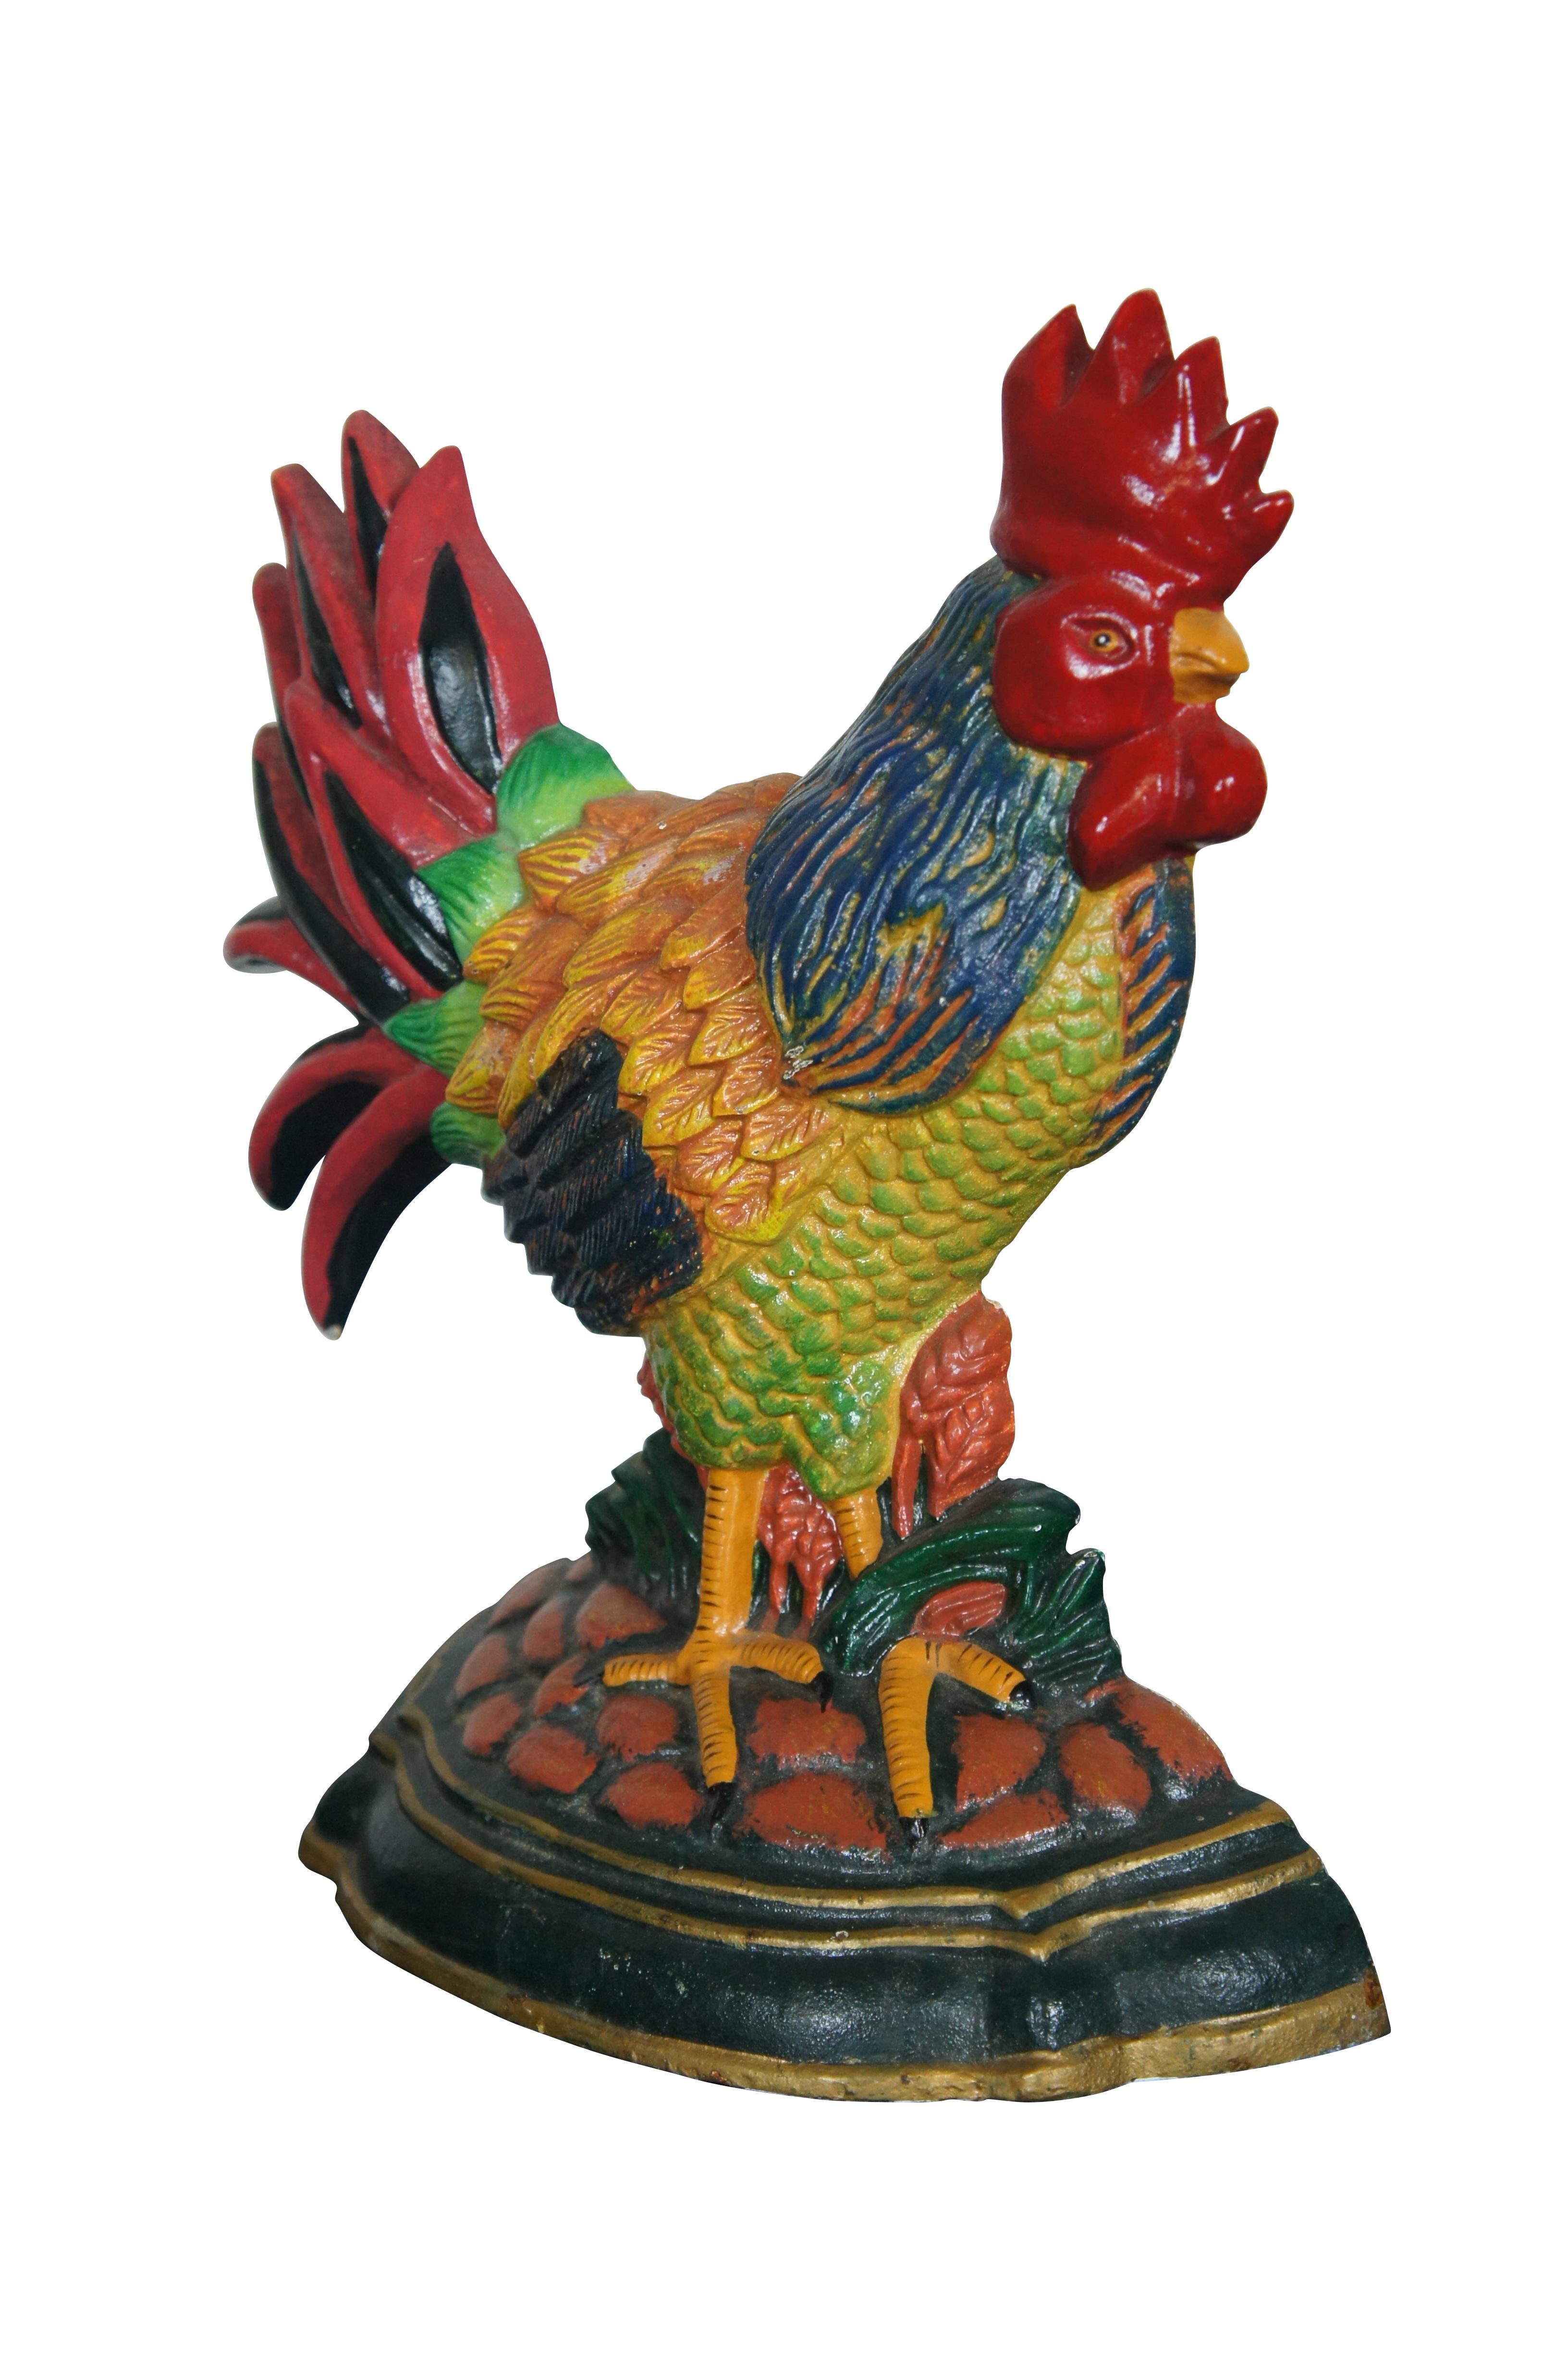 Vintage colorful painted cast iron door stop in the form of a chicken / rooster or bird.

Dimensions:
11” x 3.5” x 11.75” (Width x Depth x Height)